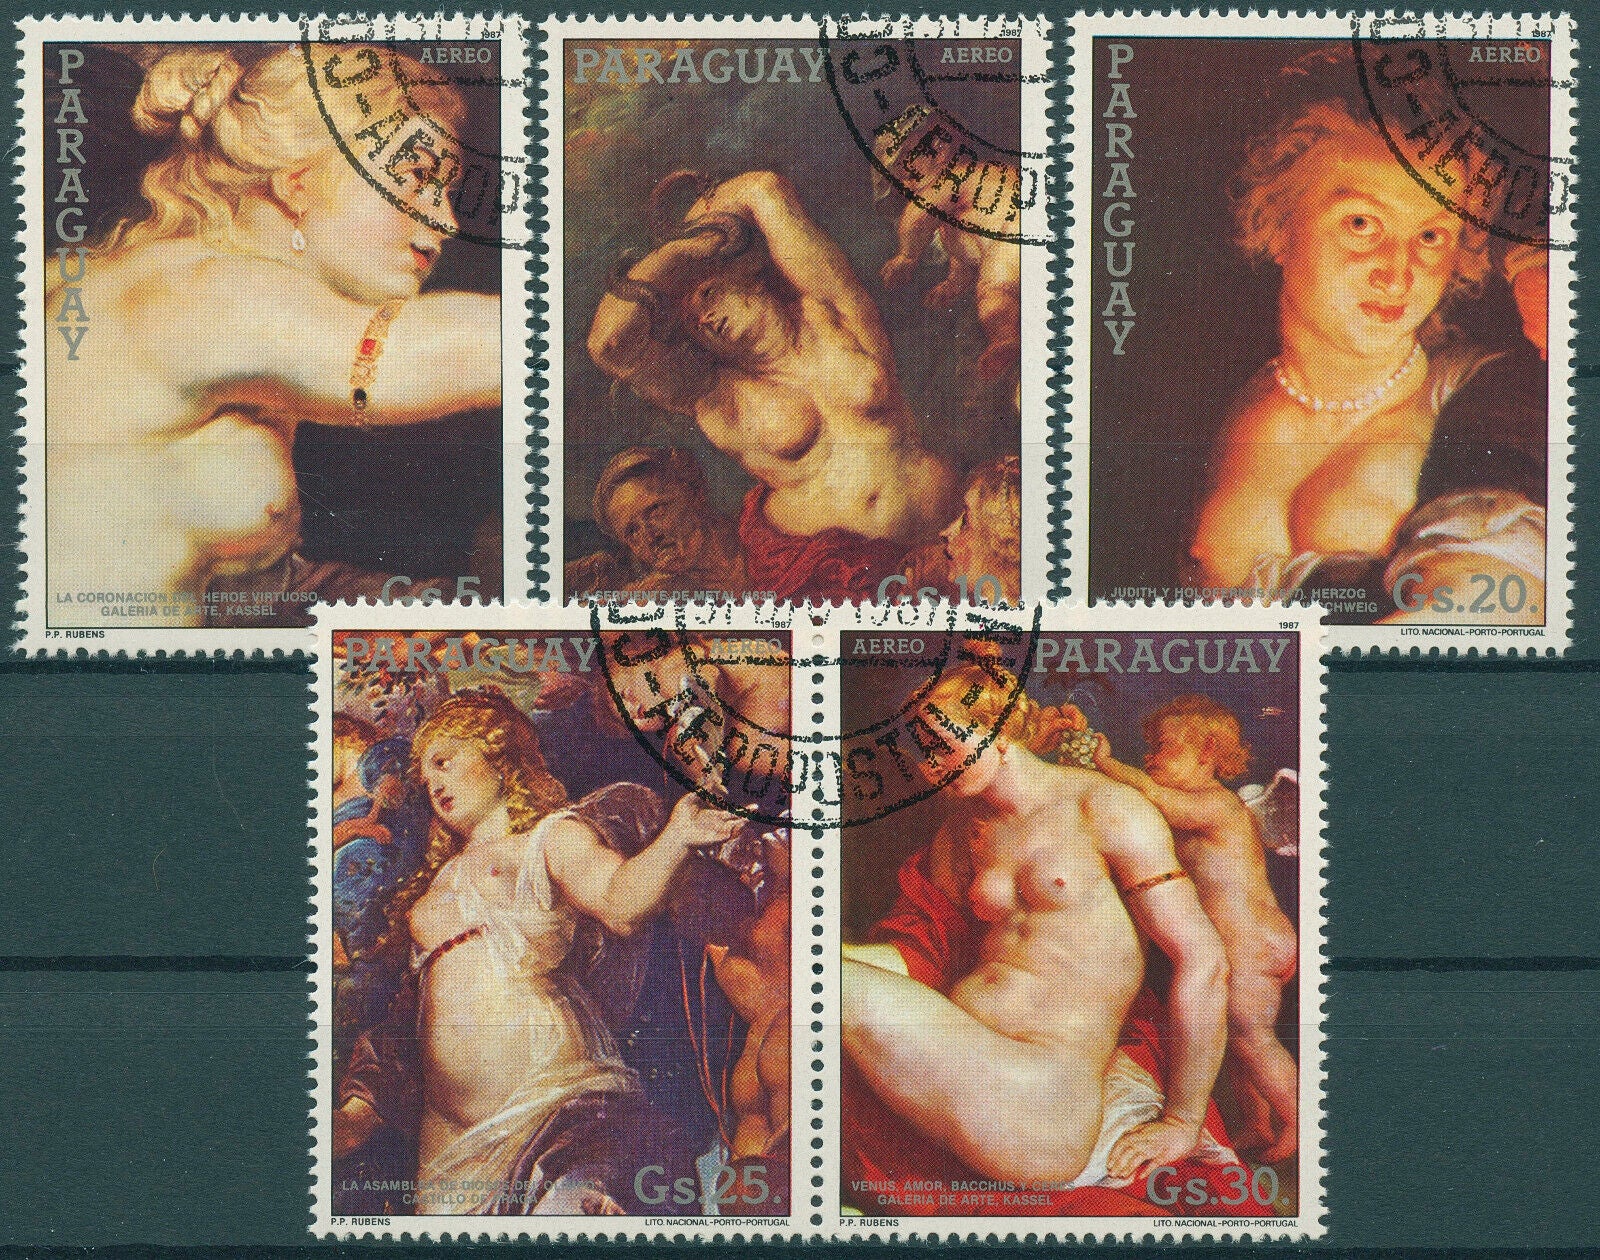 Paraguay 1987 CTO Art Stamps Peter Paul Rubens Nudes Nude Paintings 5v Set